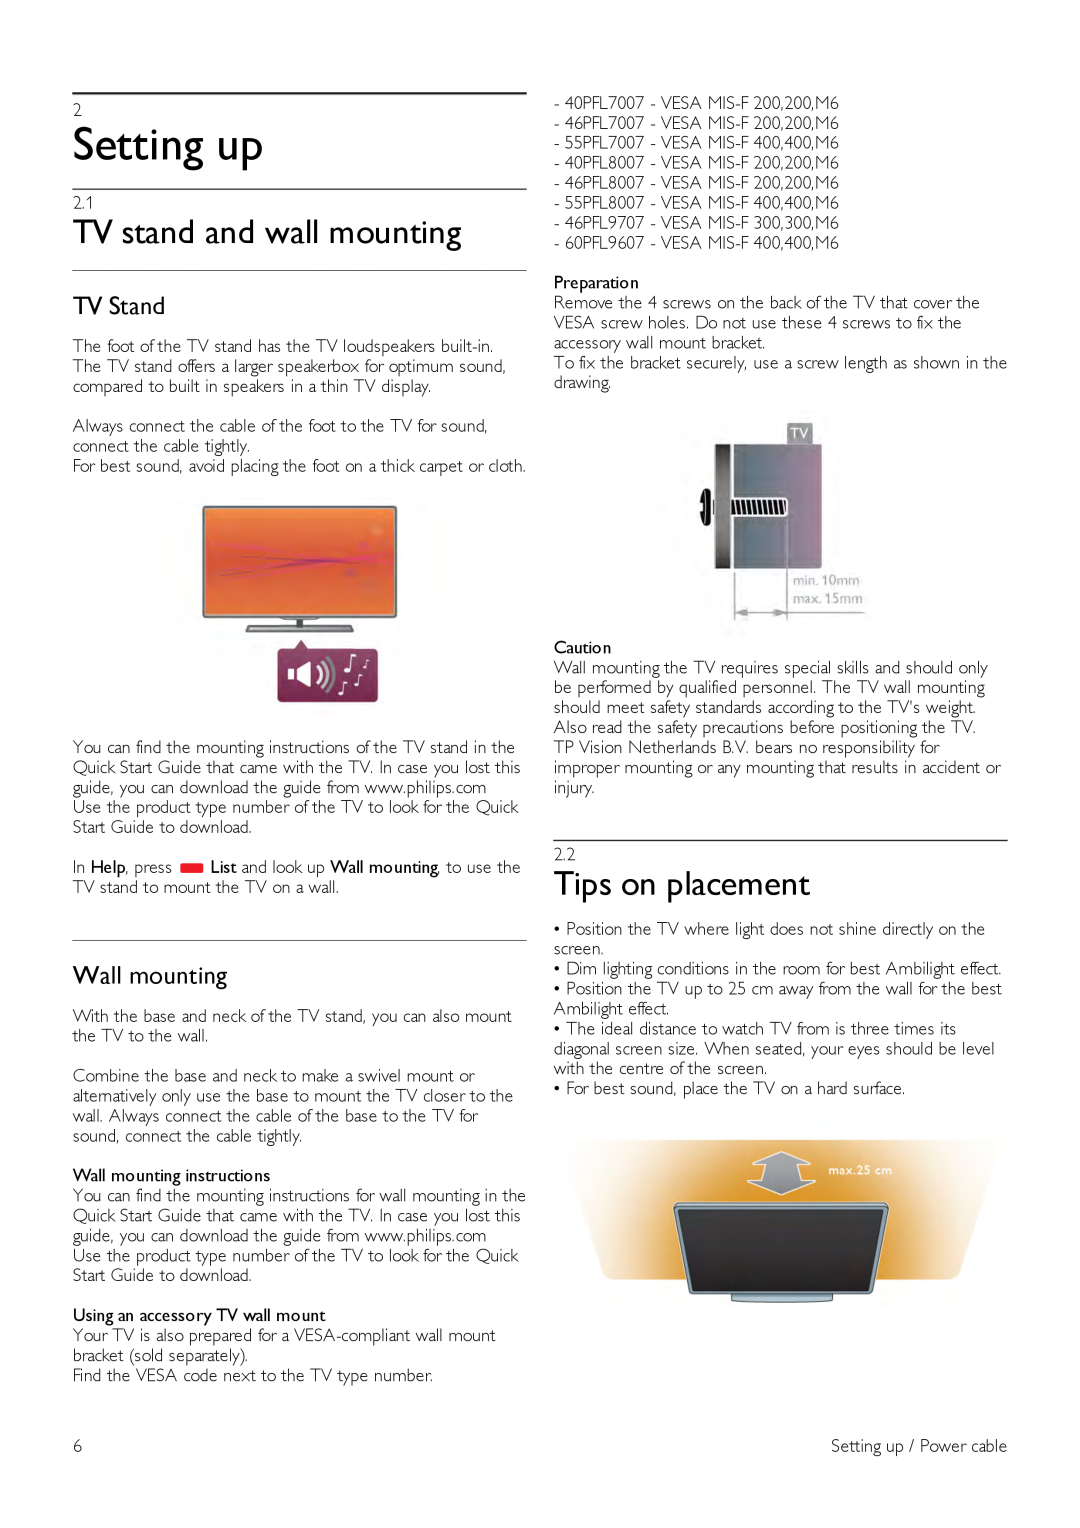 Philips 40PFL7007, 46PFL7007, 55PFL7007 Setting up, TV stand and wall mounting, Tips on placement, TV Stand, Wall mounting 